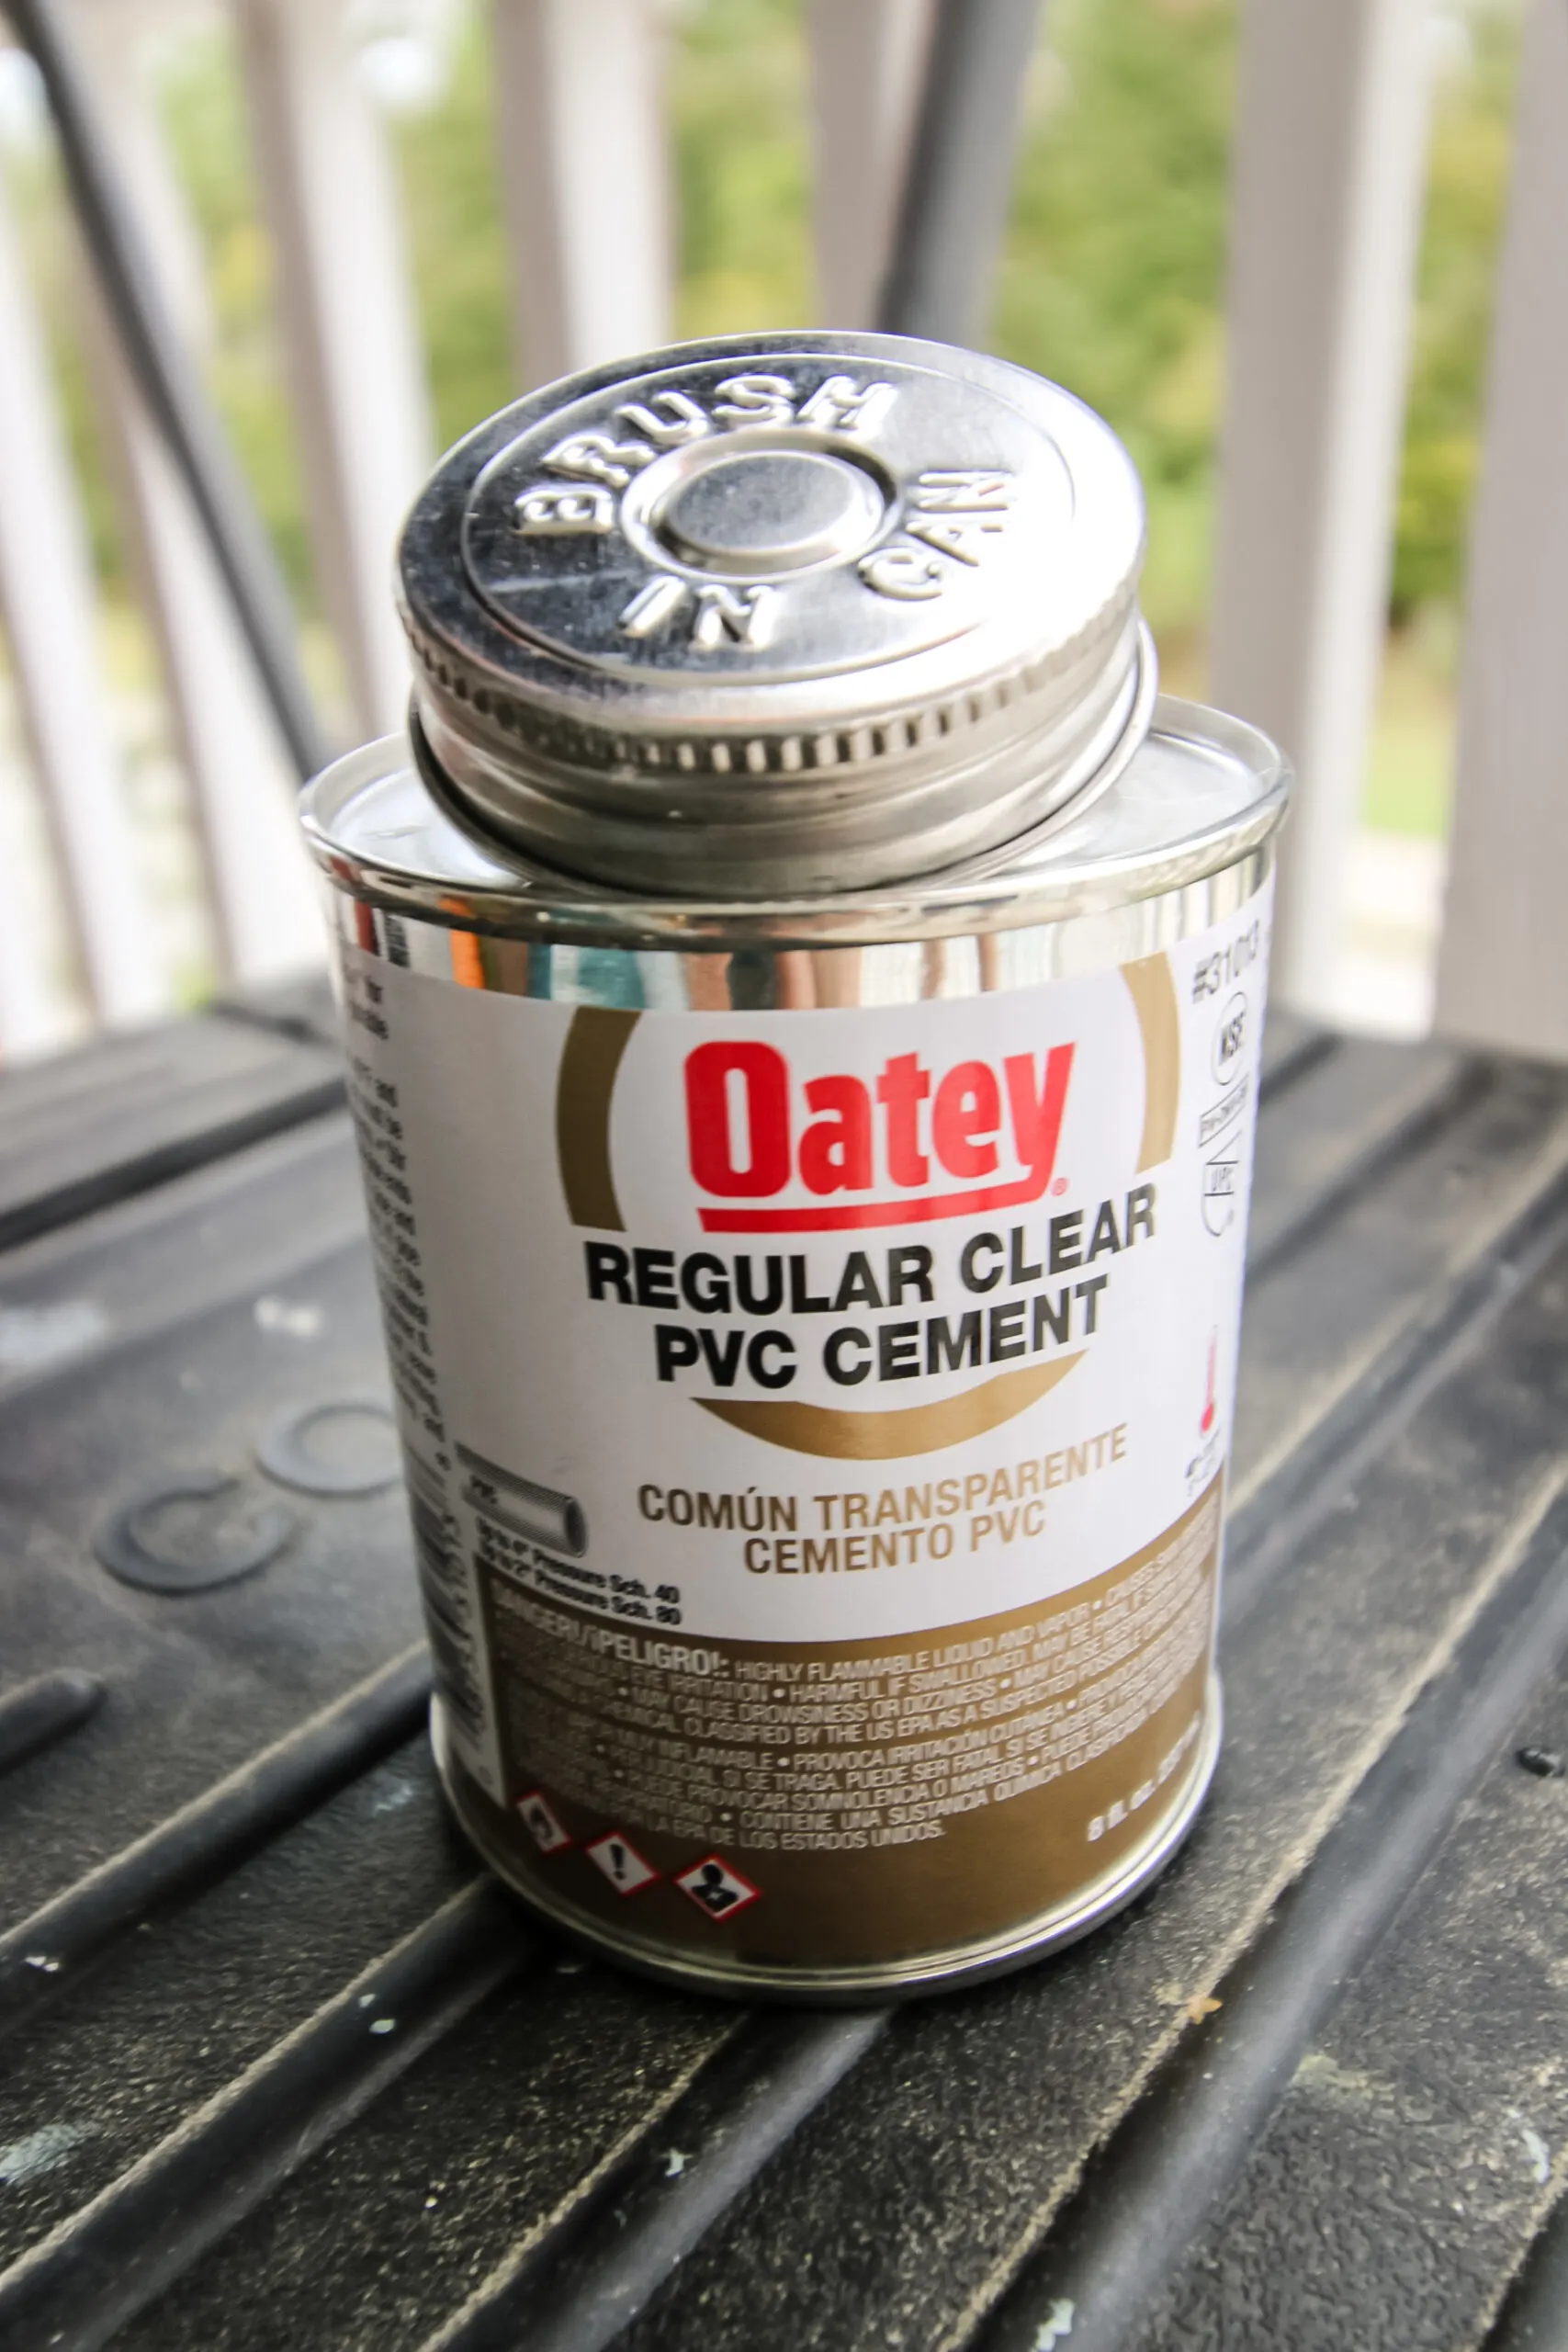 PVC cement used for PVC skeleton